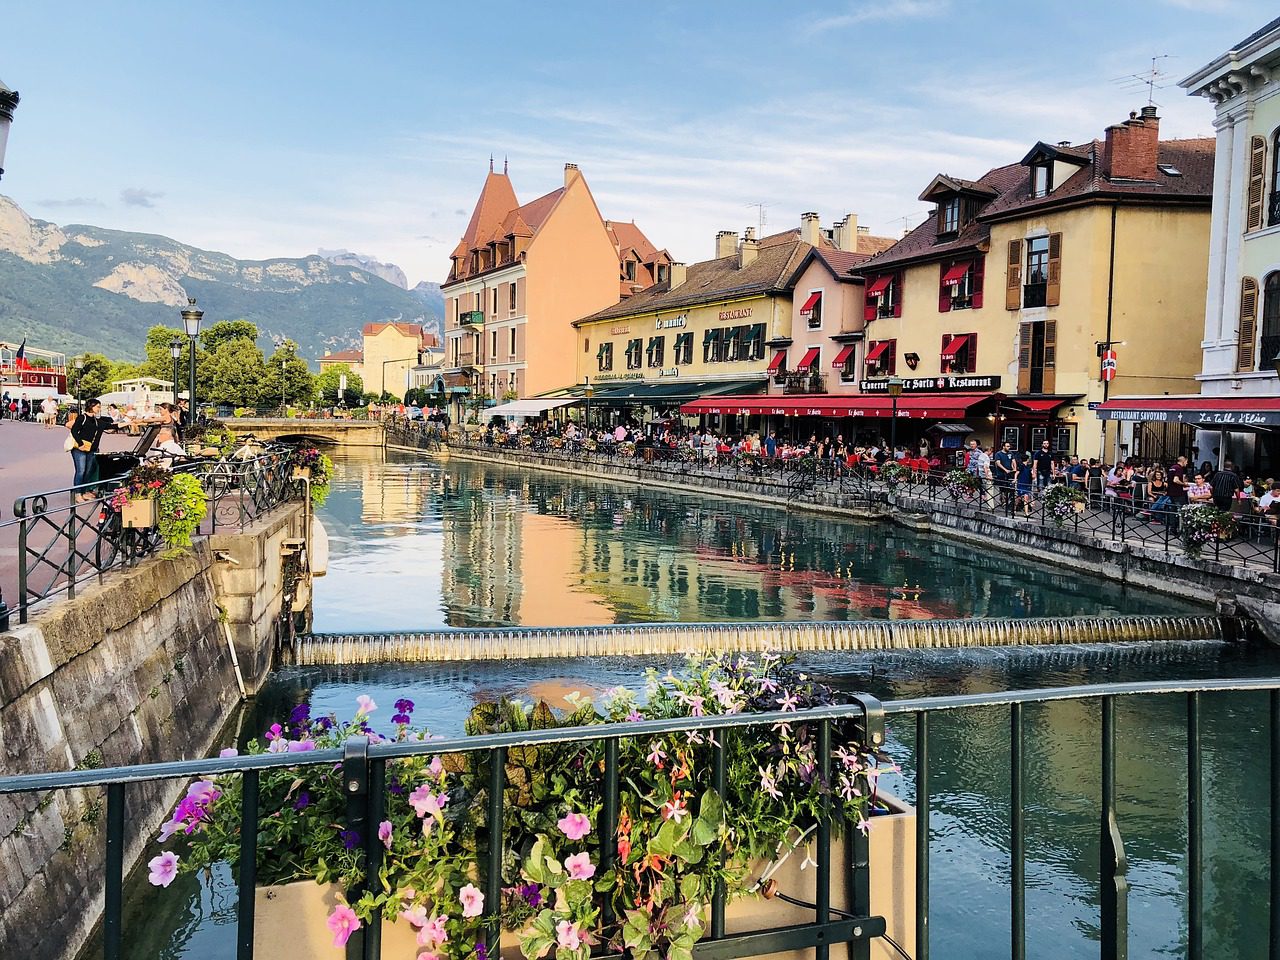 A canal in Lake Annecy's Old Town with colourful houses and flower boxes decorating the narrow alleyways in France